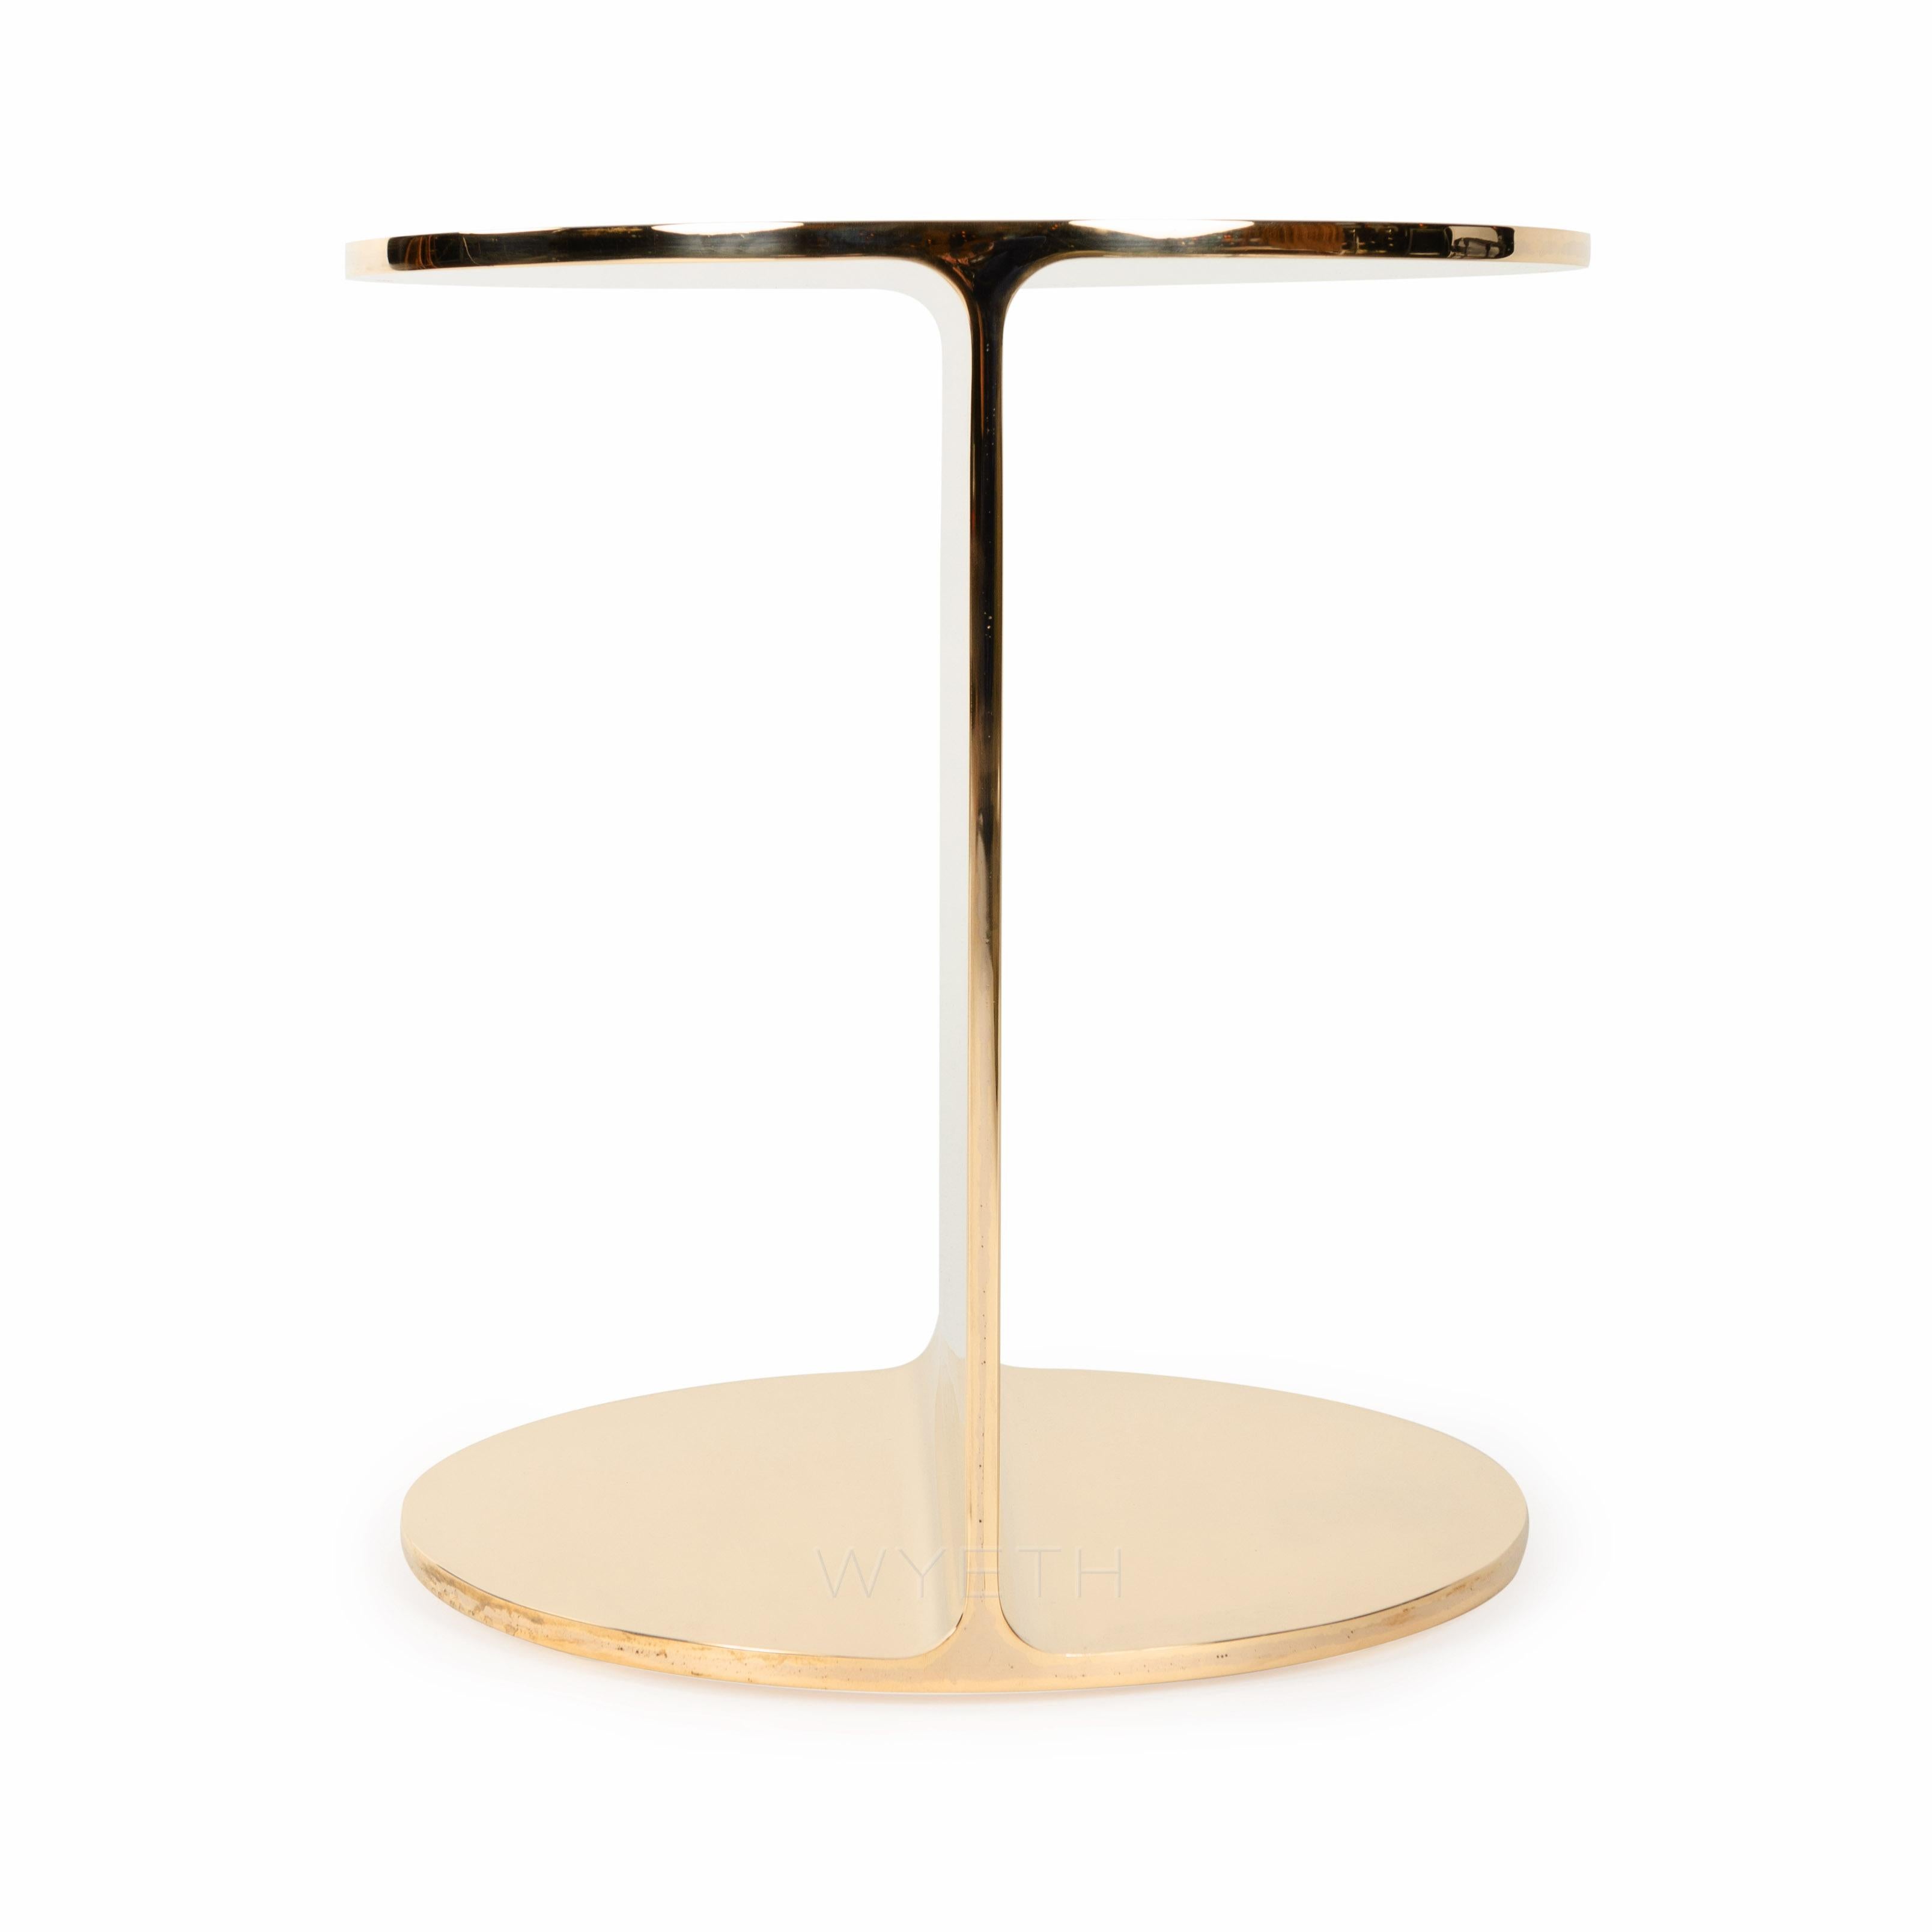 A WYETH original side or end table, handcrafted in solid polished bronze.